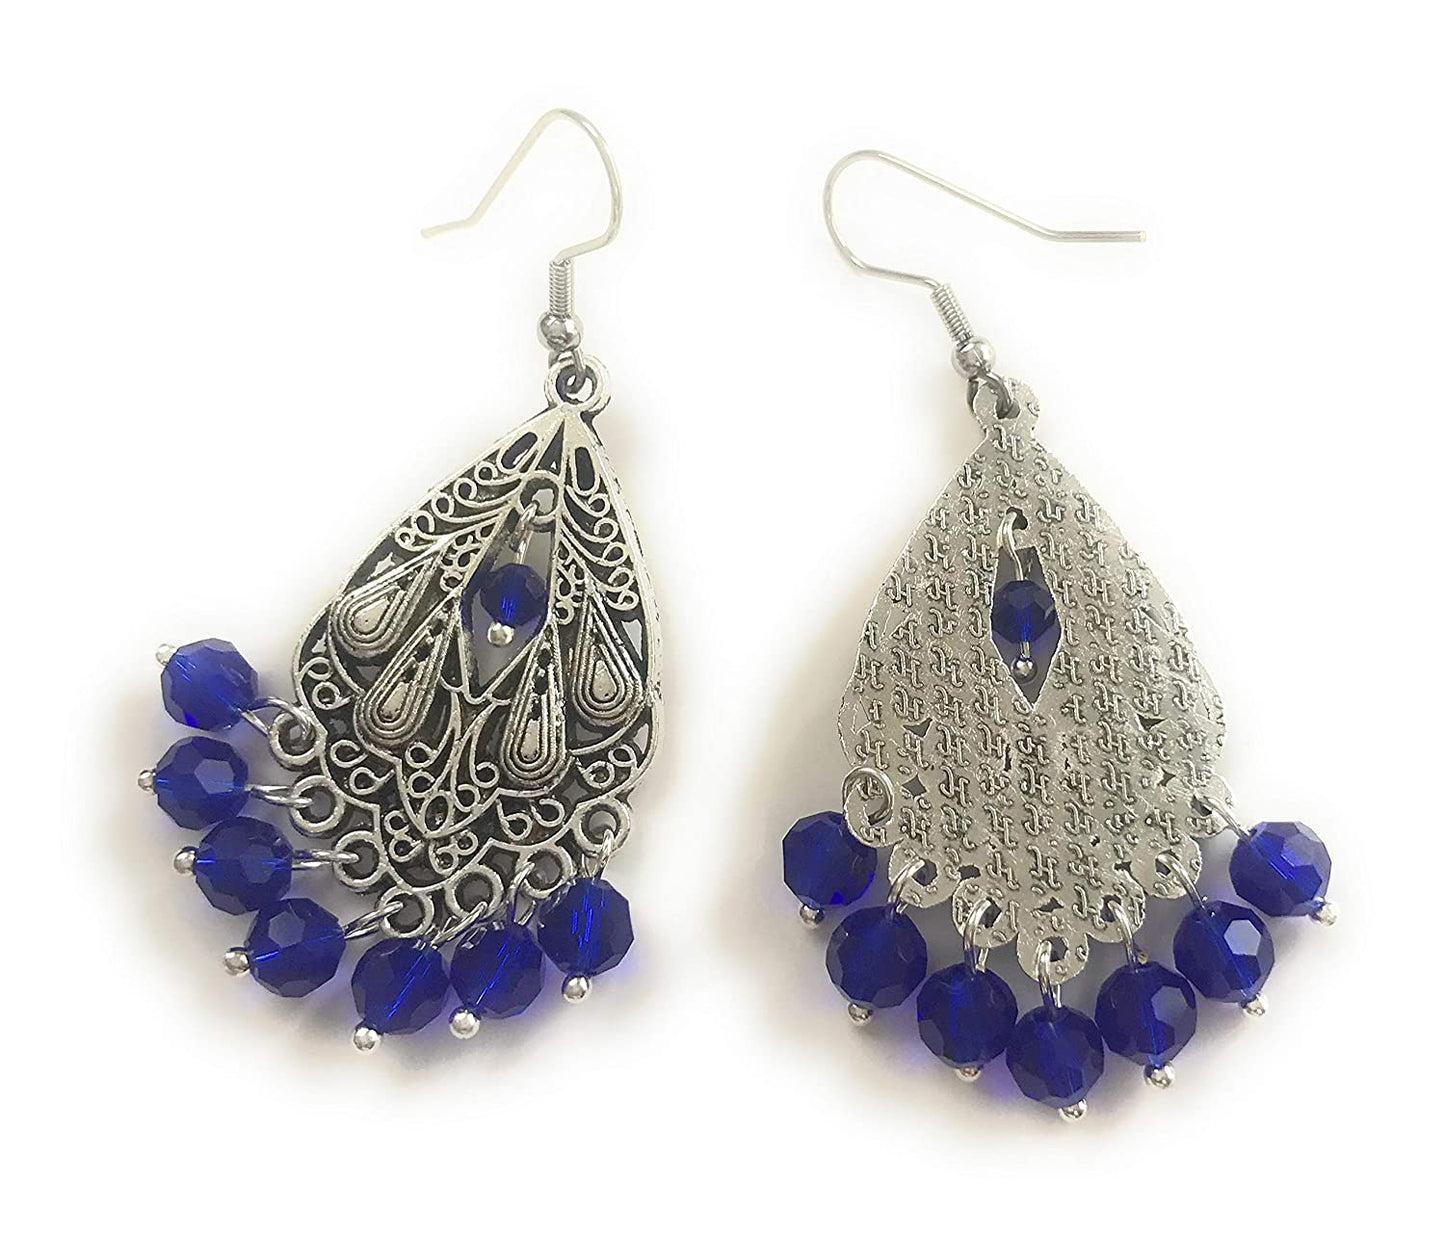 Cobalt Blue Beaded Chandelier Earrings Front and Back View from Scott D Jewelry Designs